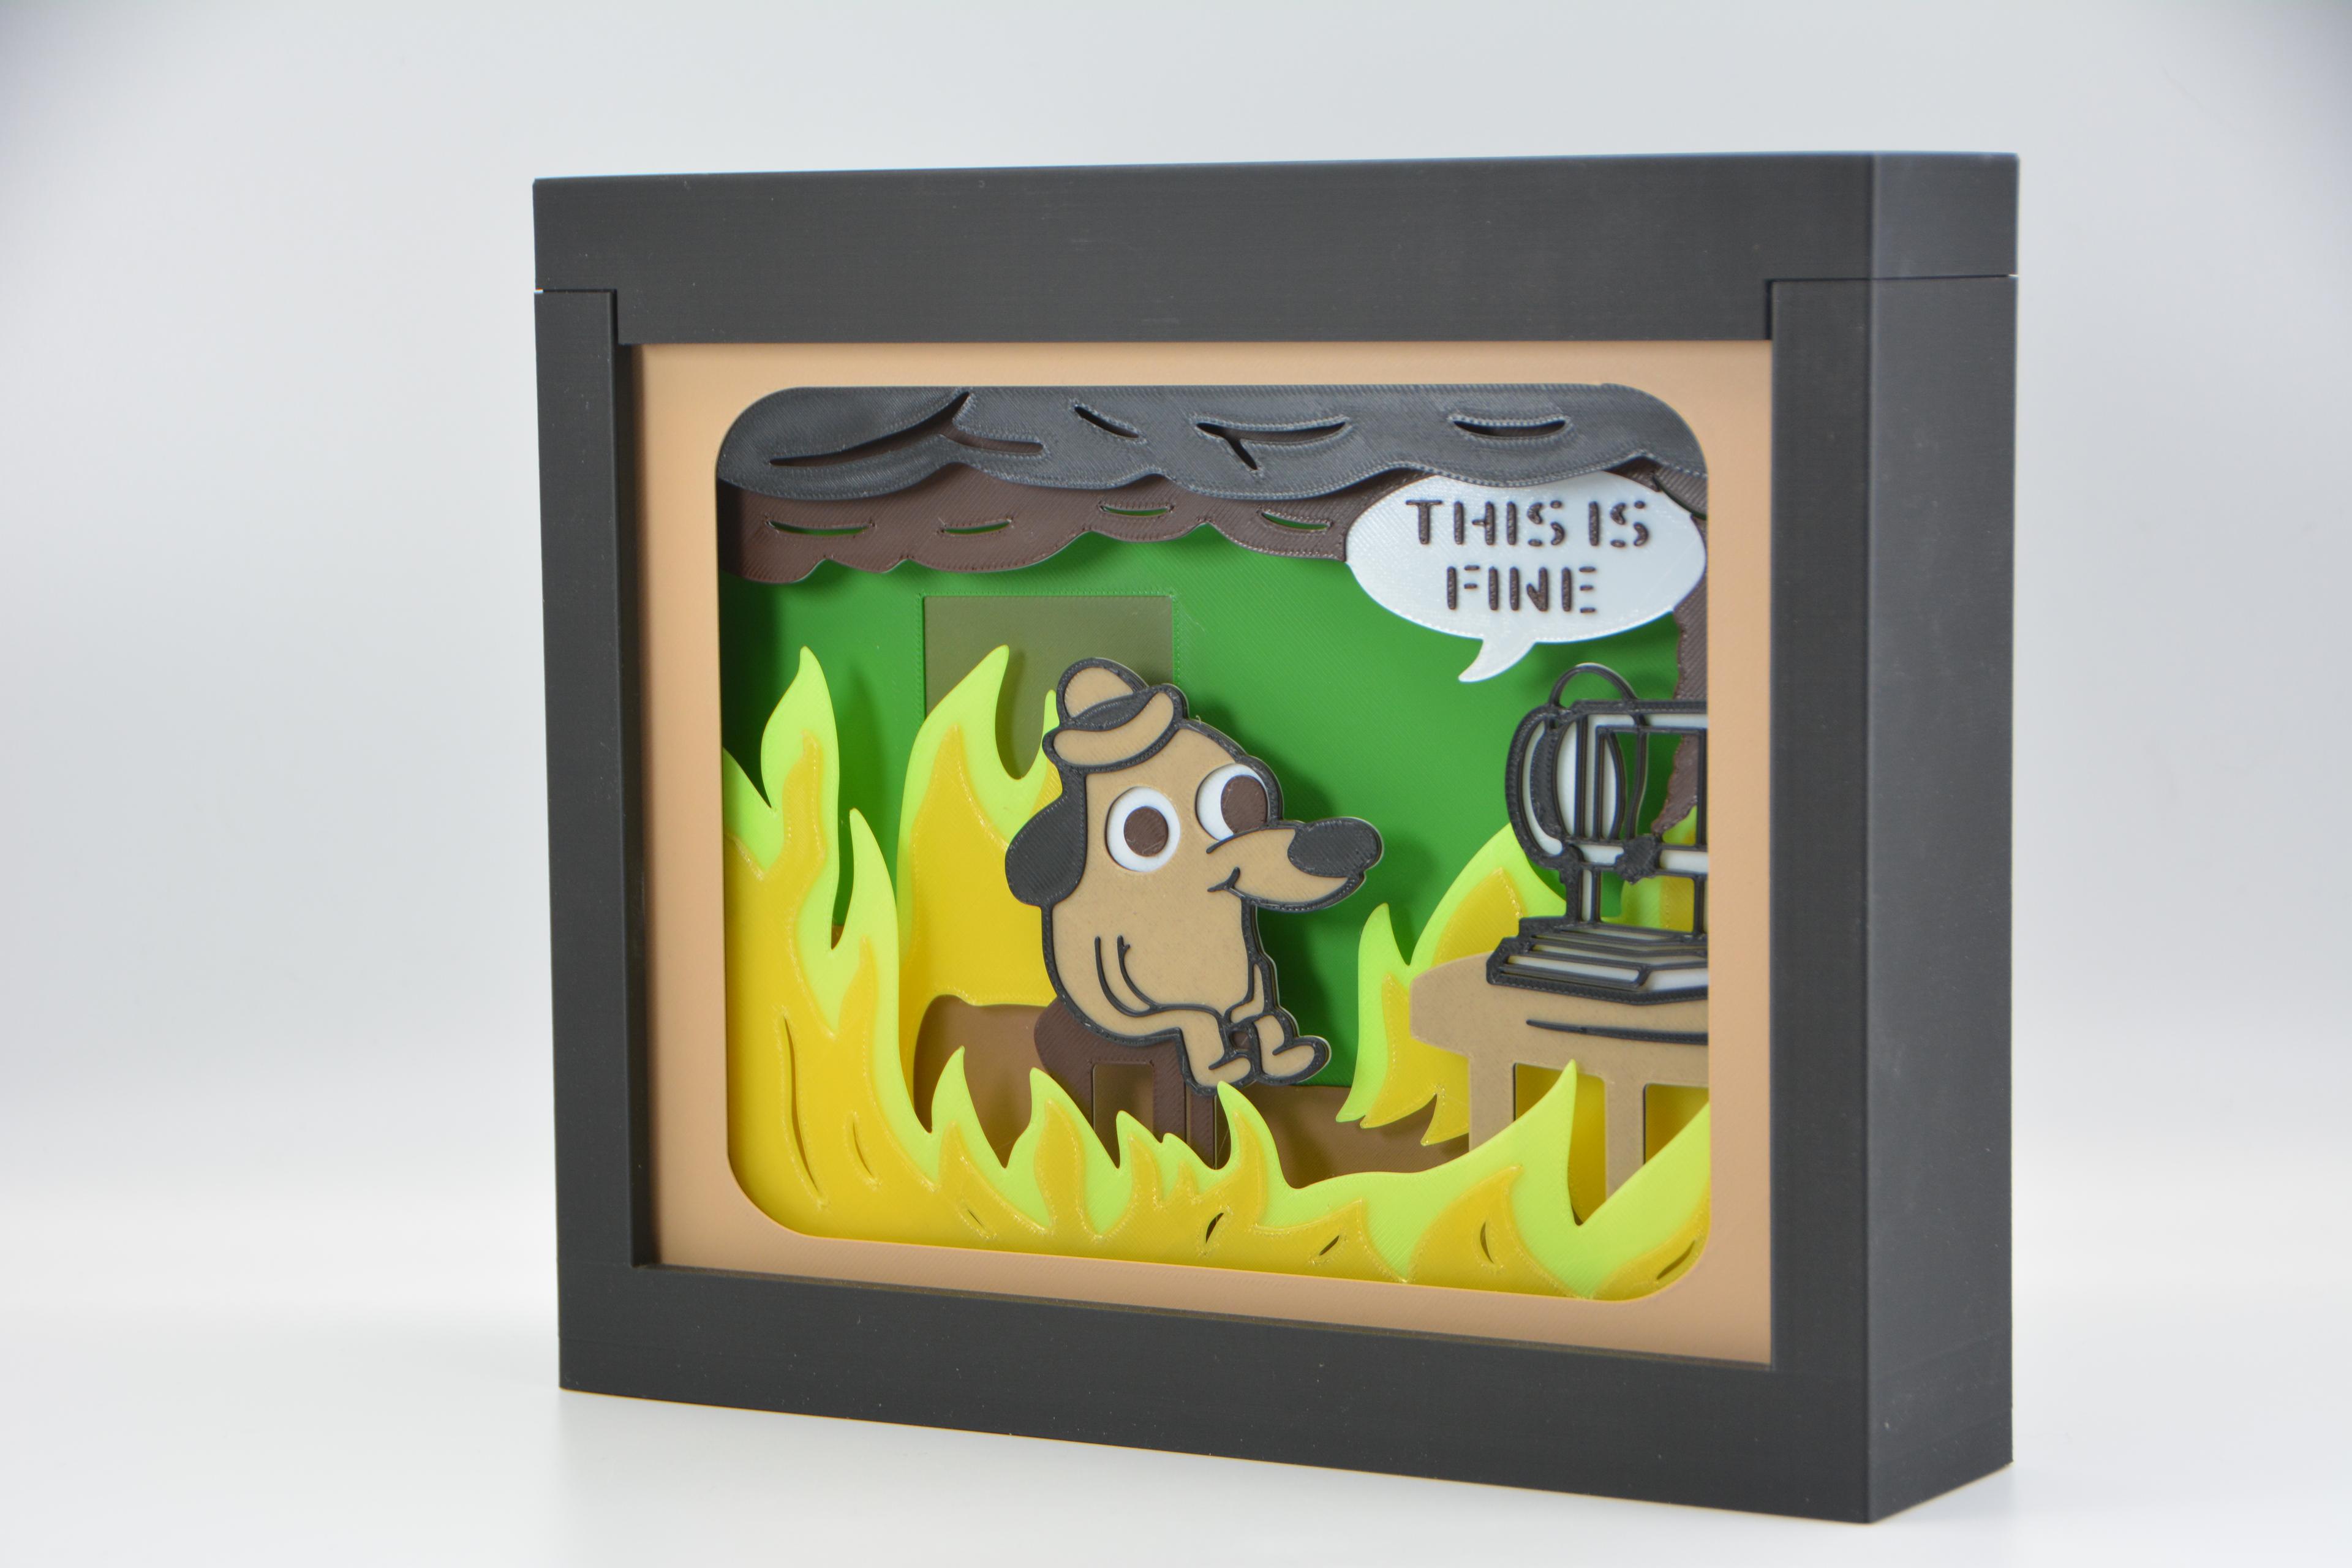 🔥 This Is Fine - 3D Printer on Fire - Shadow Box 🔥 3d model